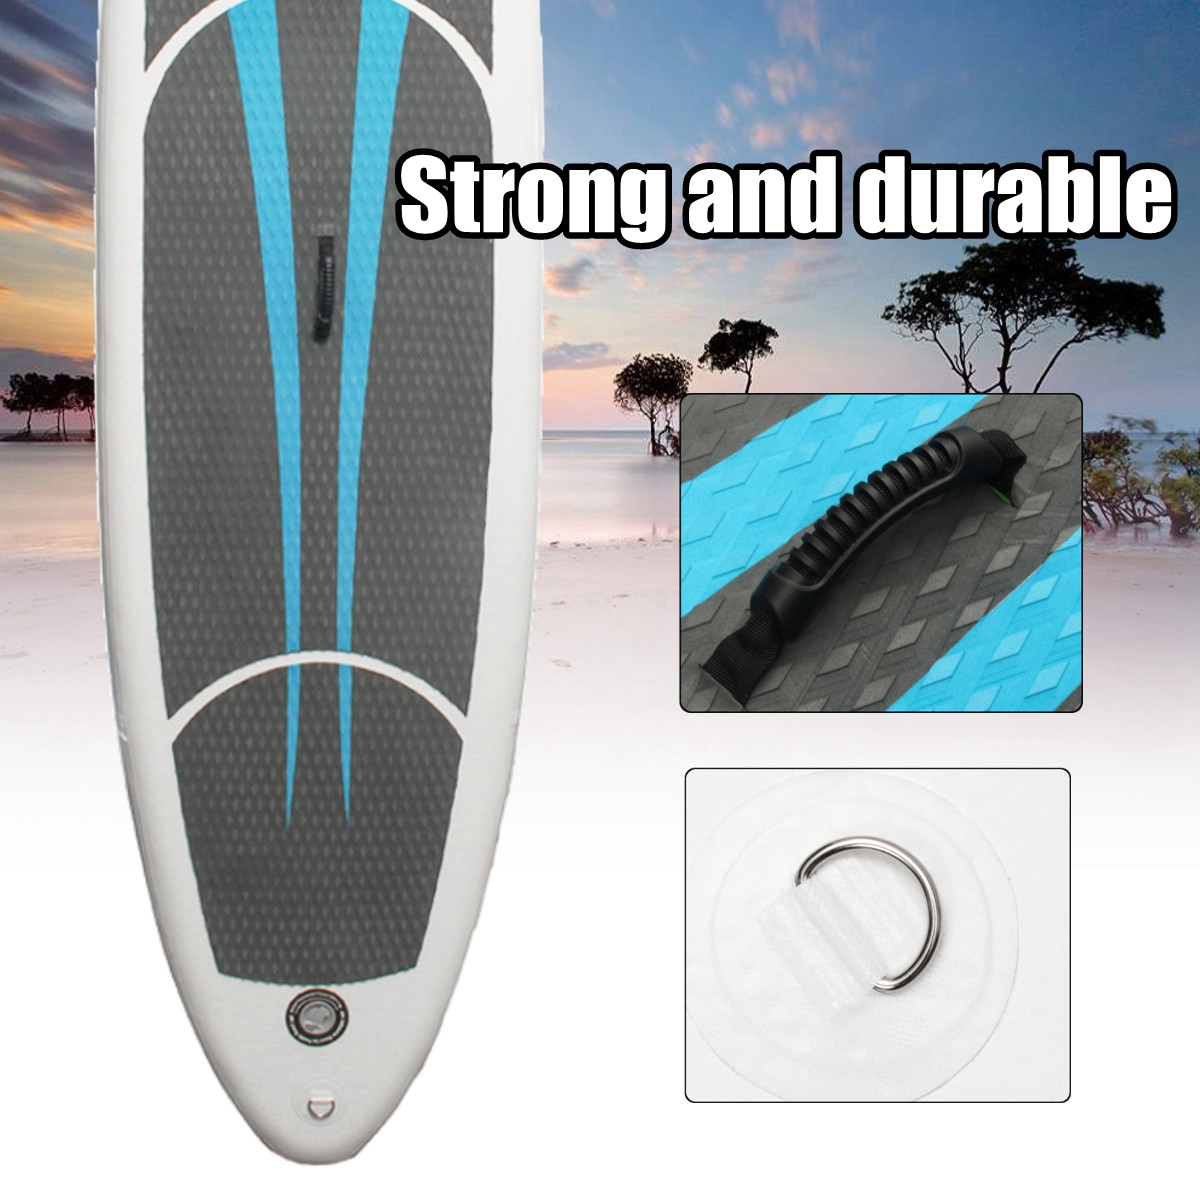 330x76x15CM-10FT-SUP-Inflatable-Surfing-Board-Kits-Soft-Surfboard-Stand-Up-Paddle-Board-with-3-Fin-1354495